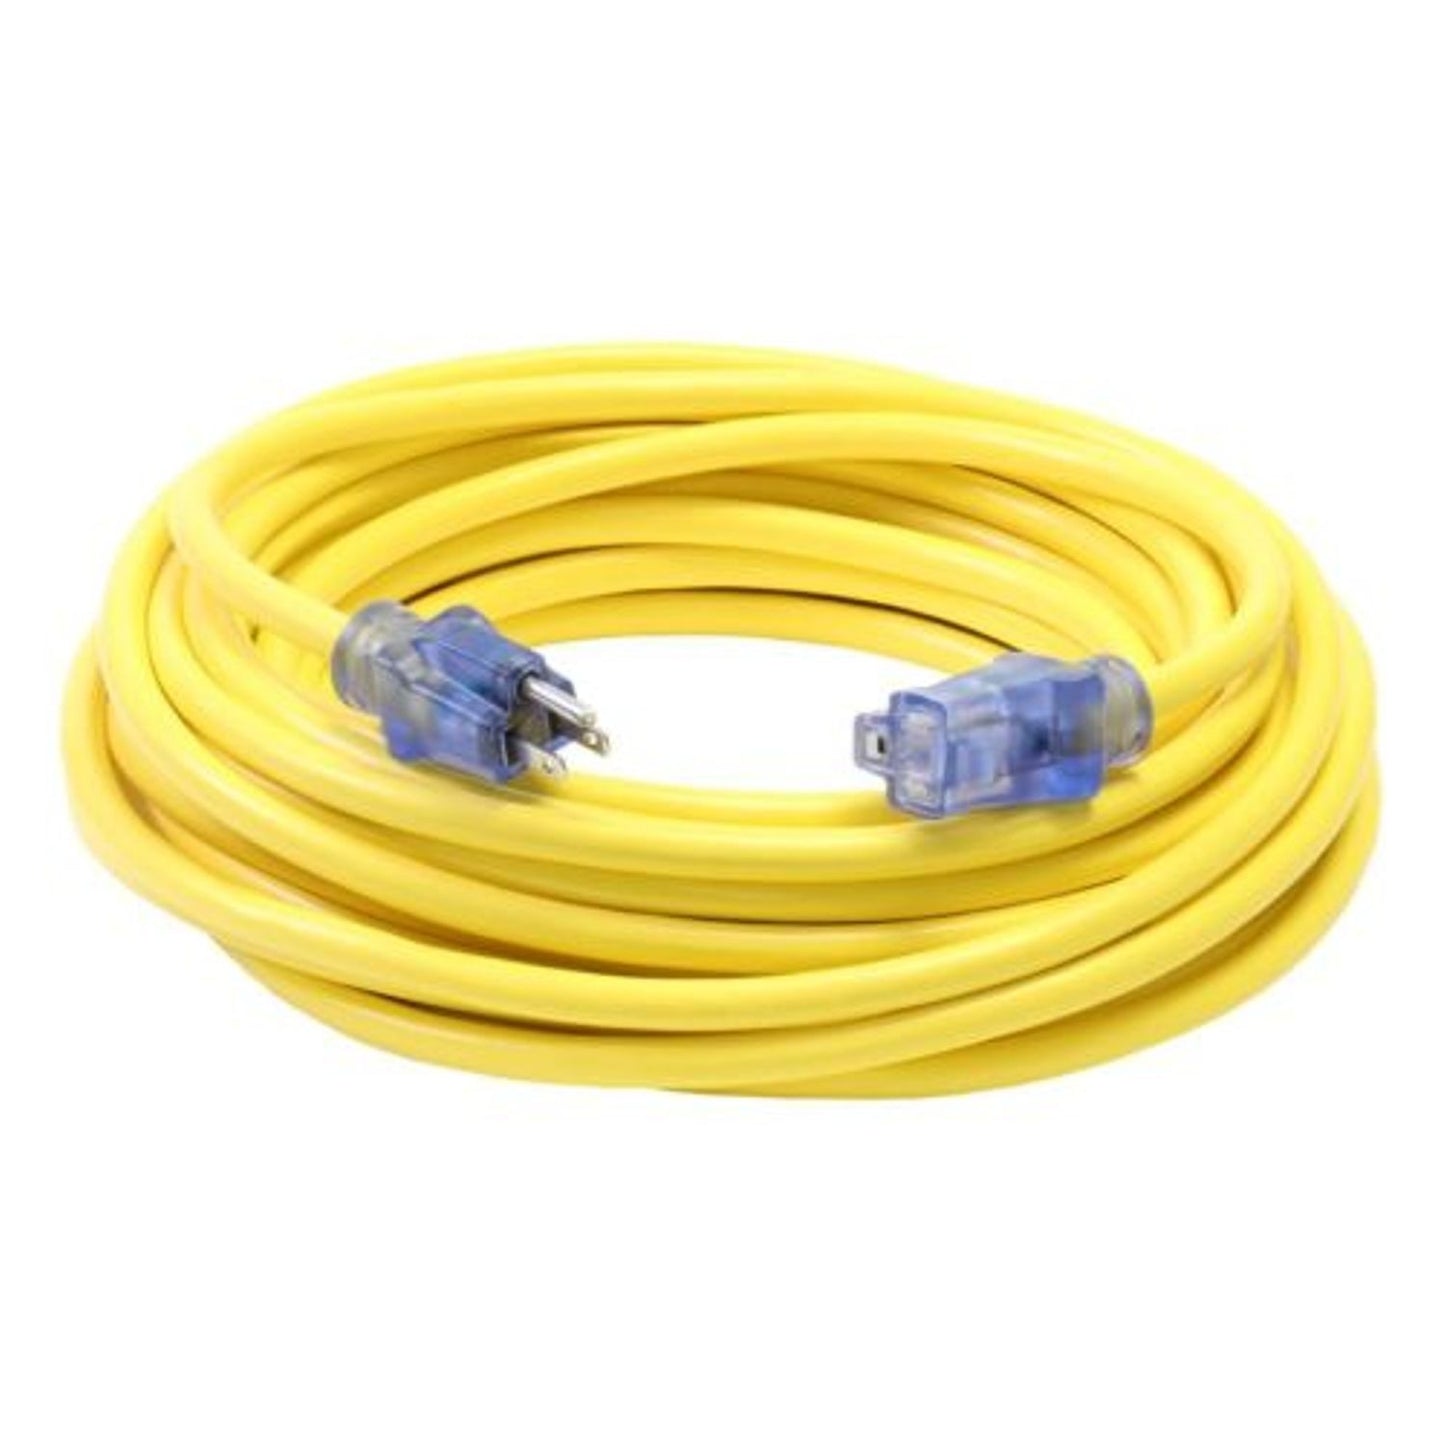 50 Foot Extension Cord 16/3 Pro Star LIghted